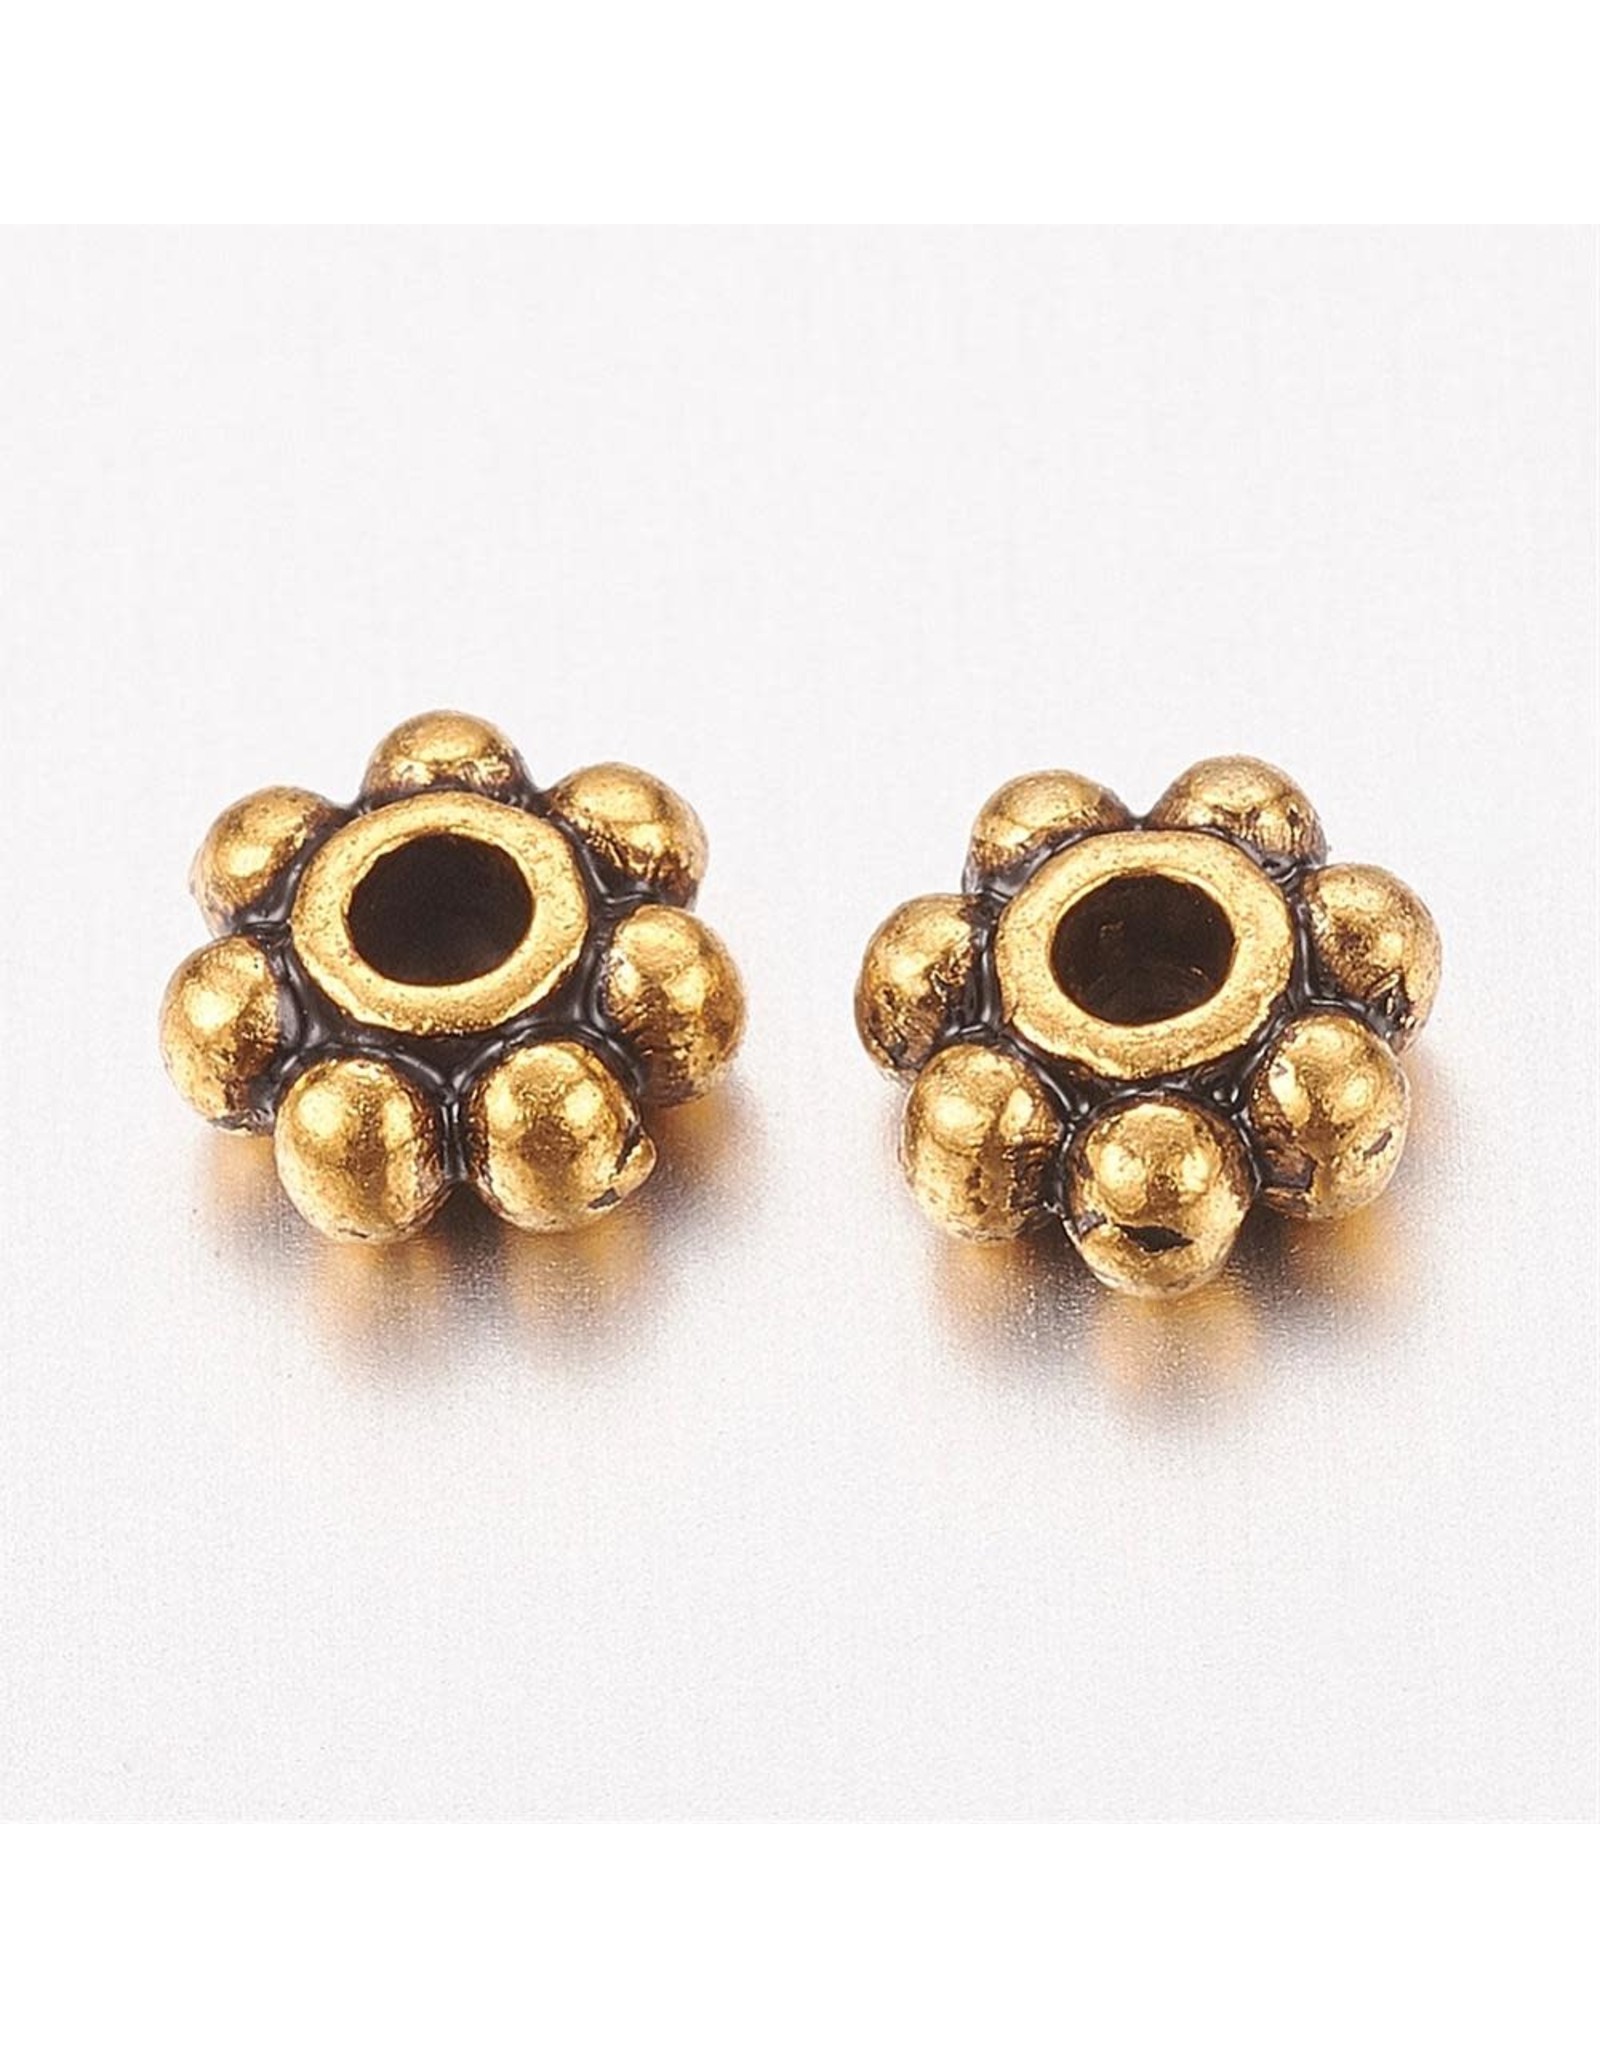 Daisy Spacer Bead Antique Gold 4mm x100 NF